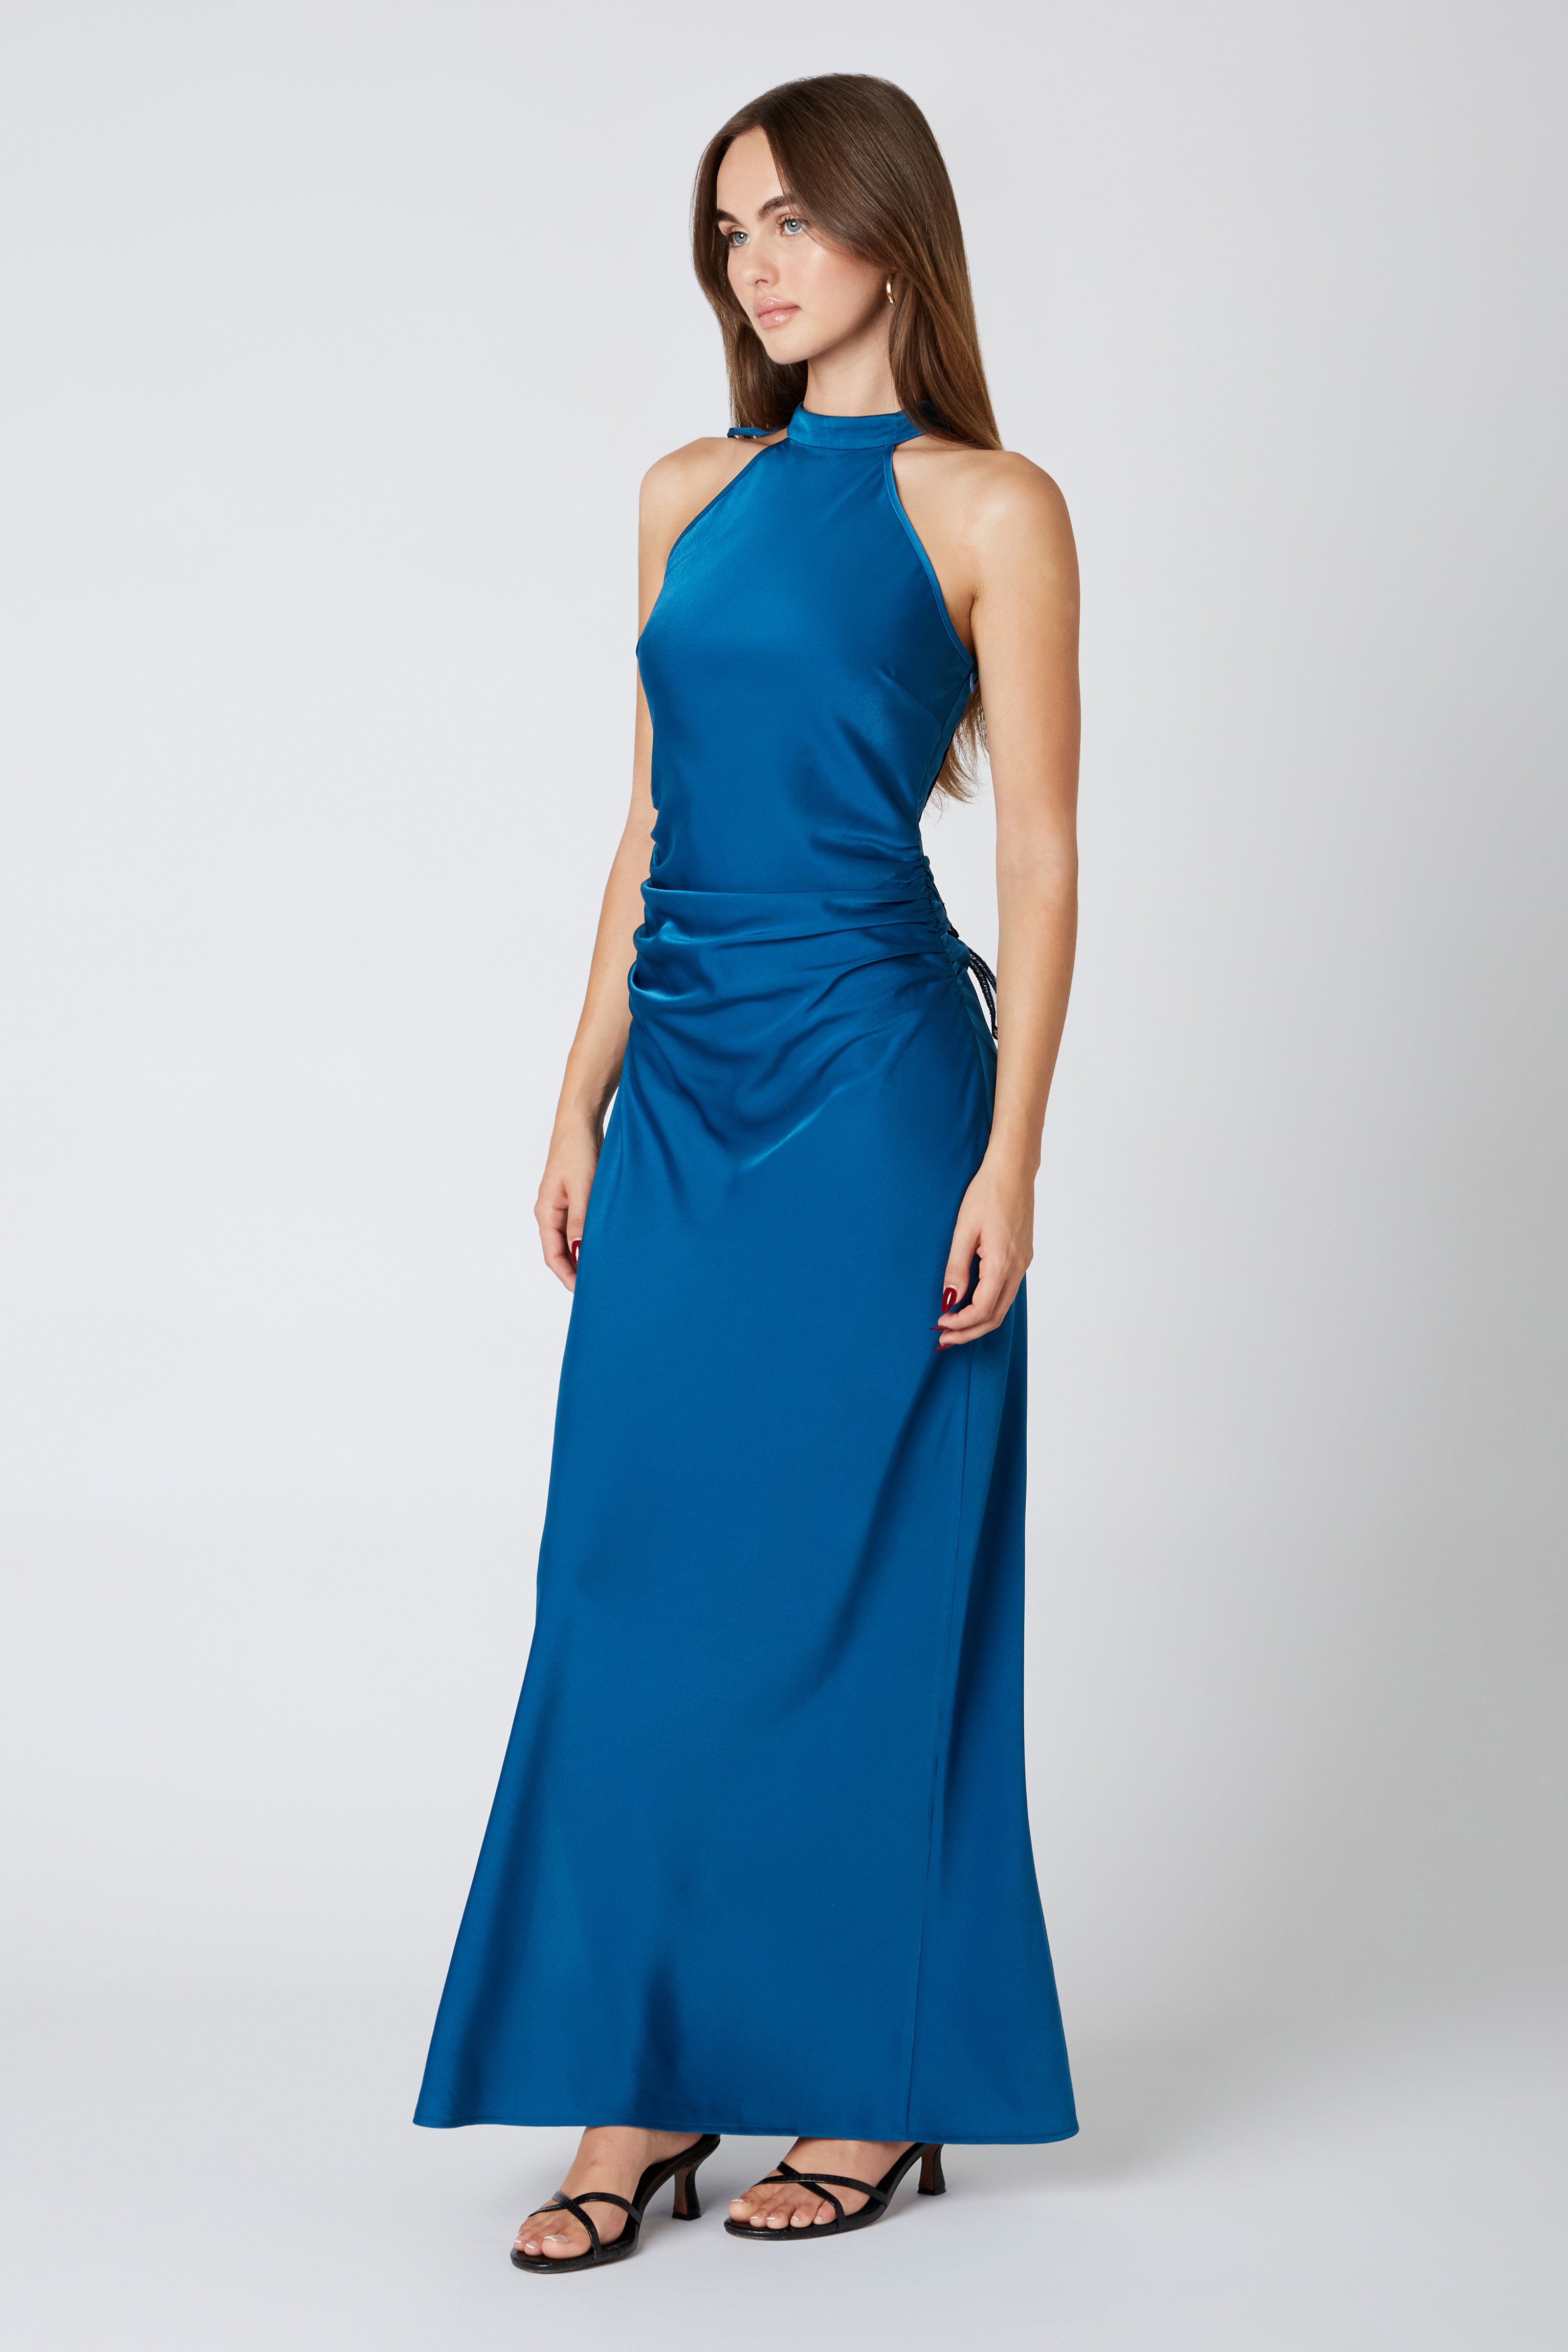 Runway Butterfly Maxi Dress in Teal Blue Side View